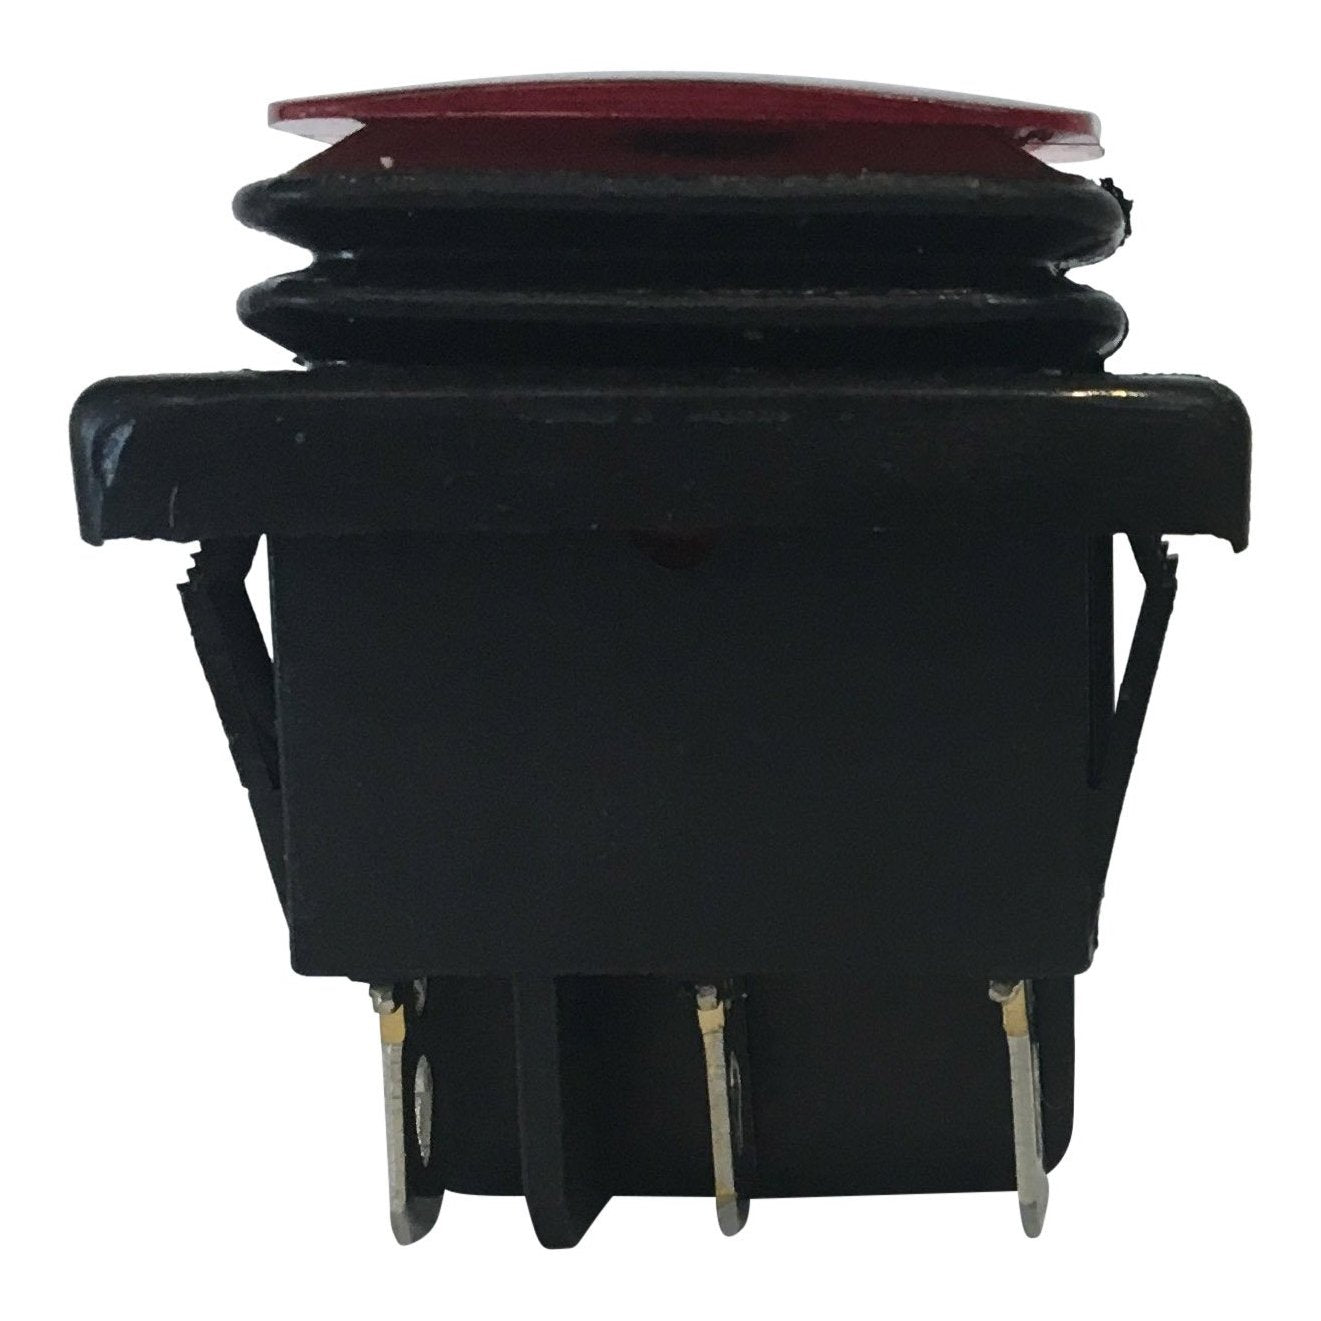 Waterproof LED Rocker Switches Product Image